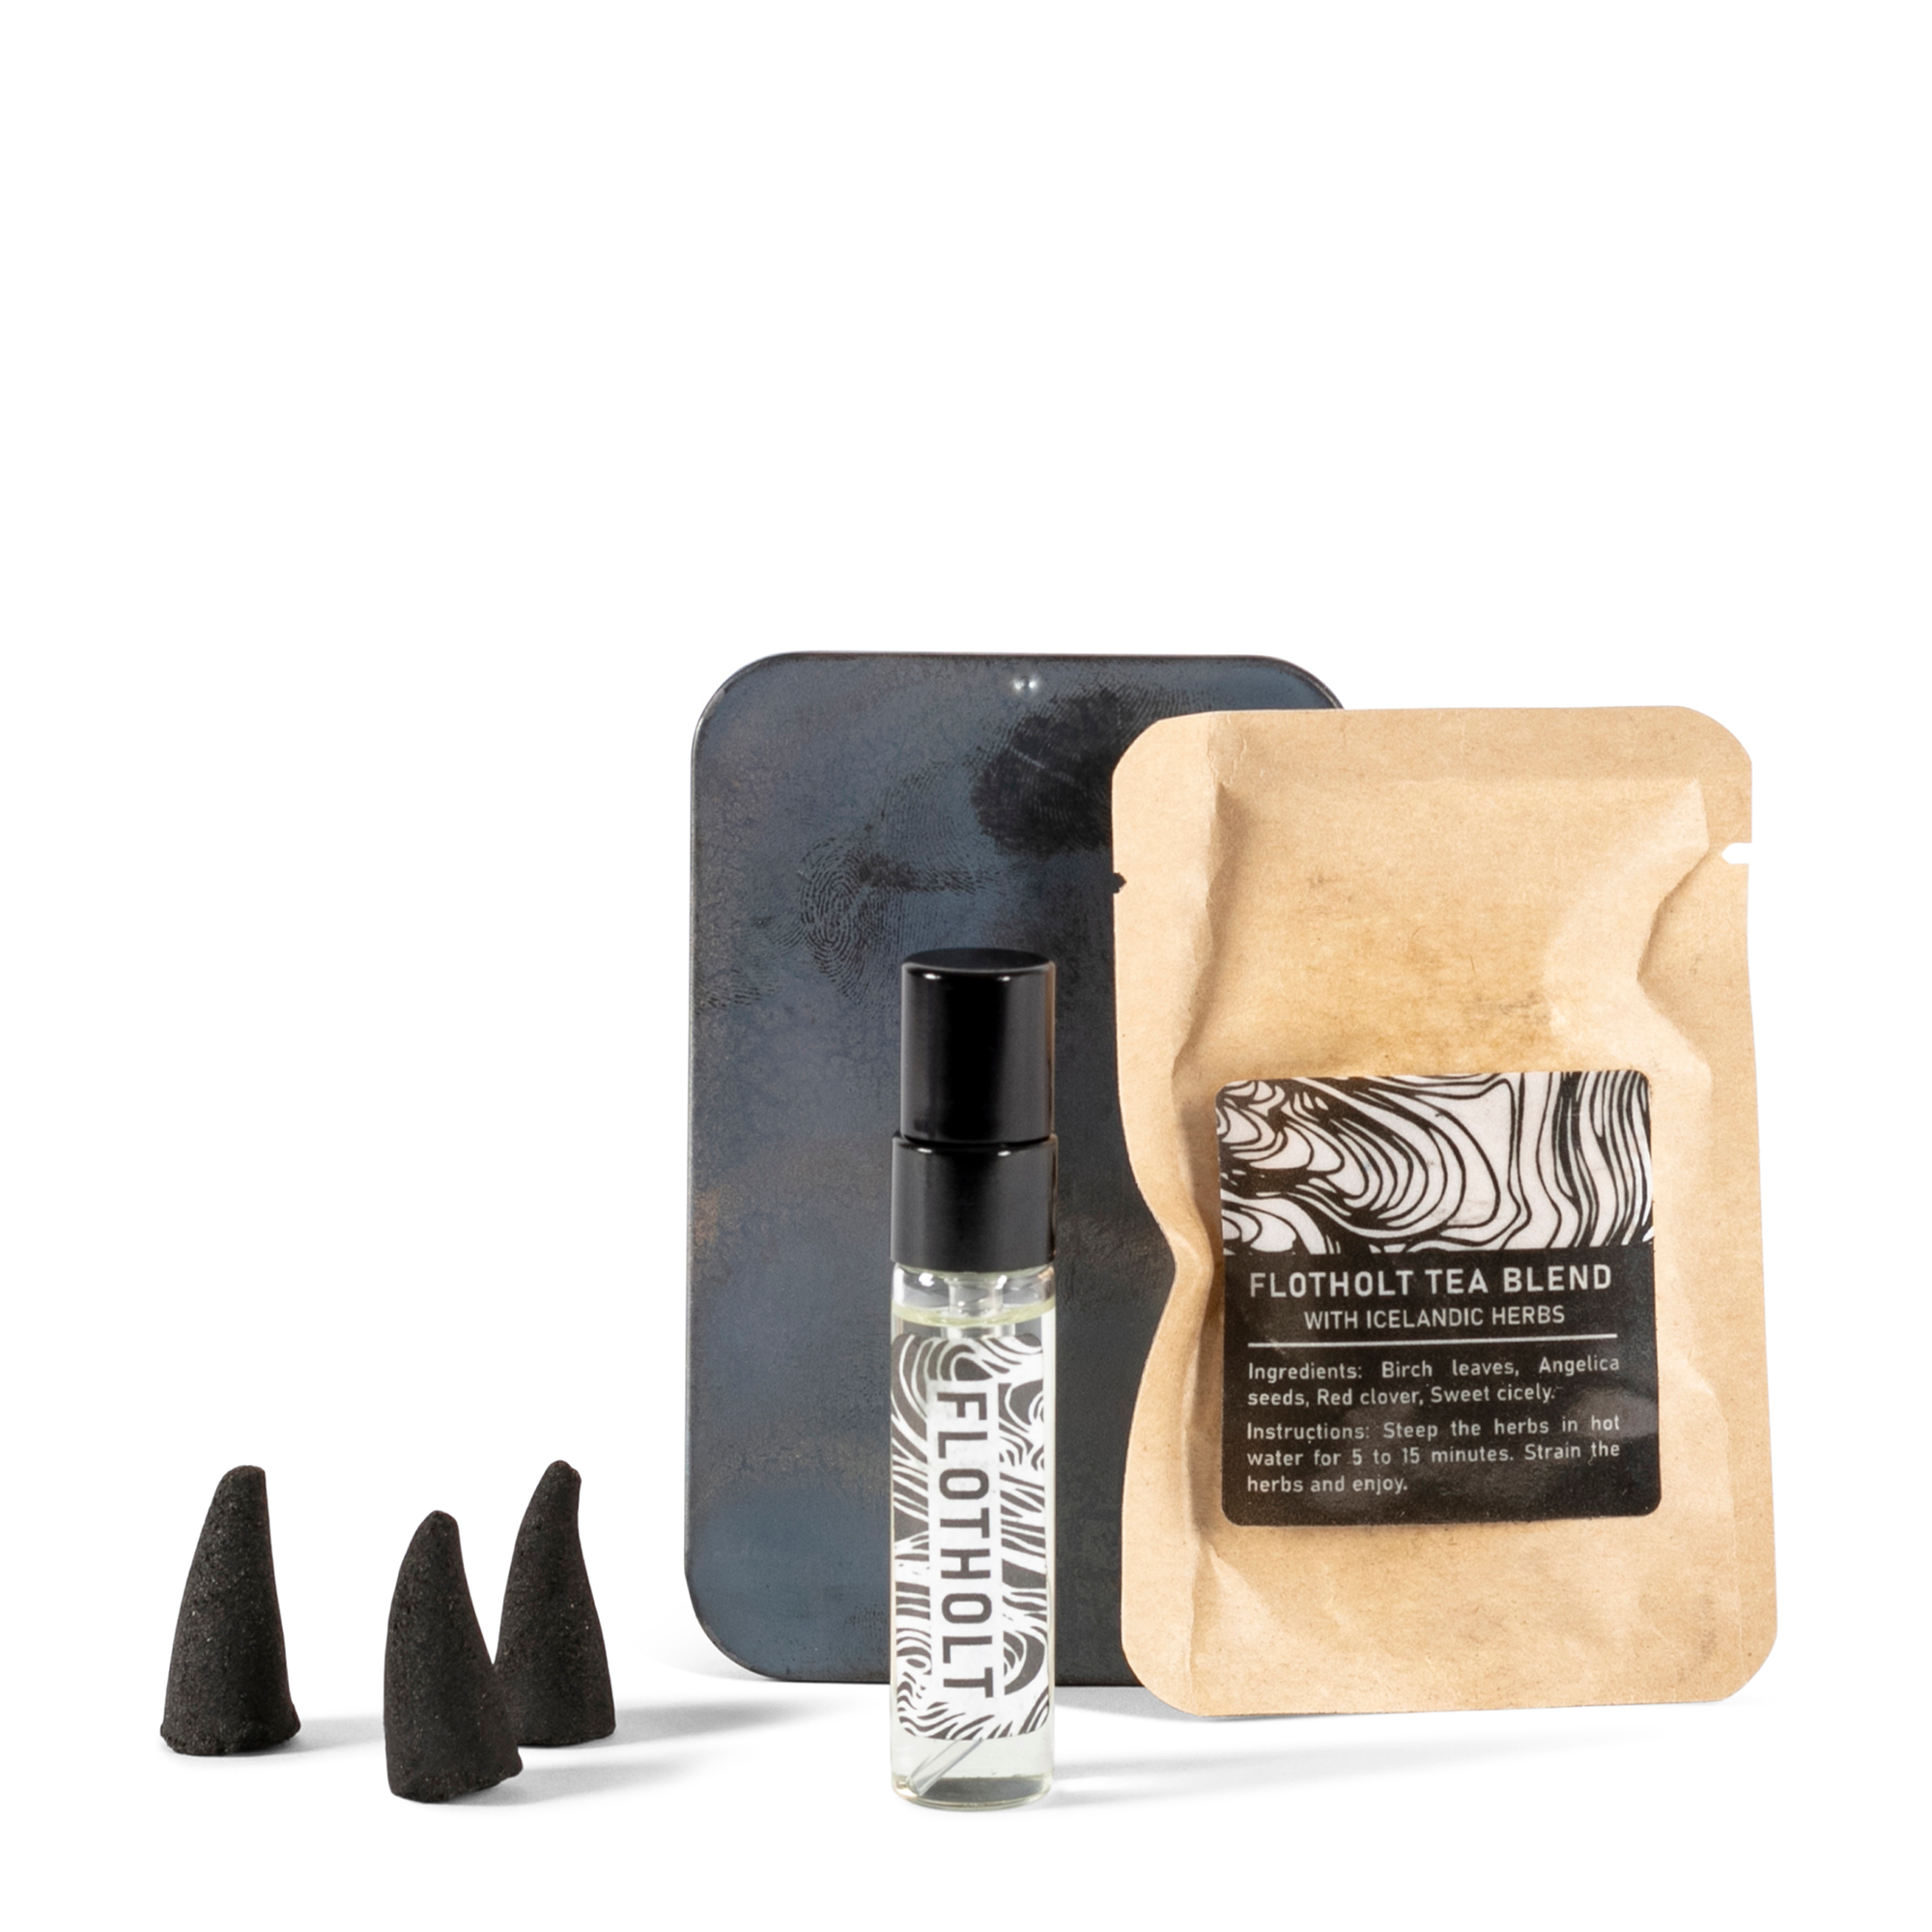 The Scent Survival Kit: This fragrance features a unique blend of amber, bergamot, birch tar, fresh air, seaweed, dirt, grass, and vetiver. The kit includes a 5ml edition of FLOTHOLT perfume, three incense cones, and one portion of Icelandic herbal tea.